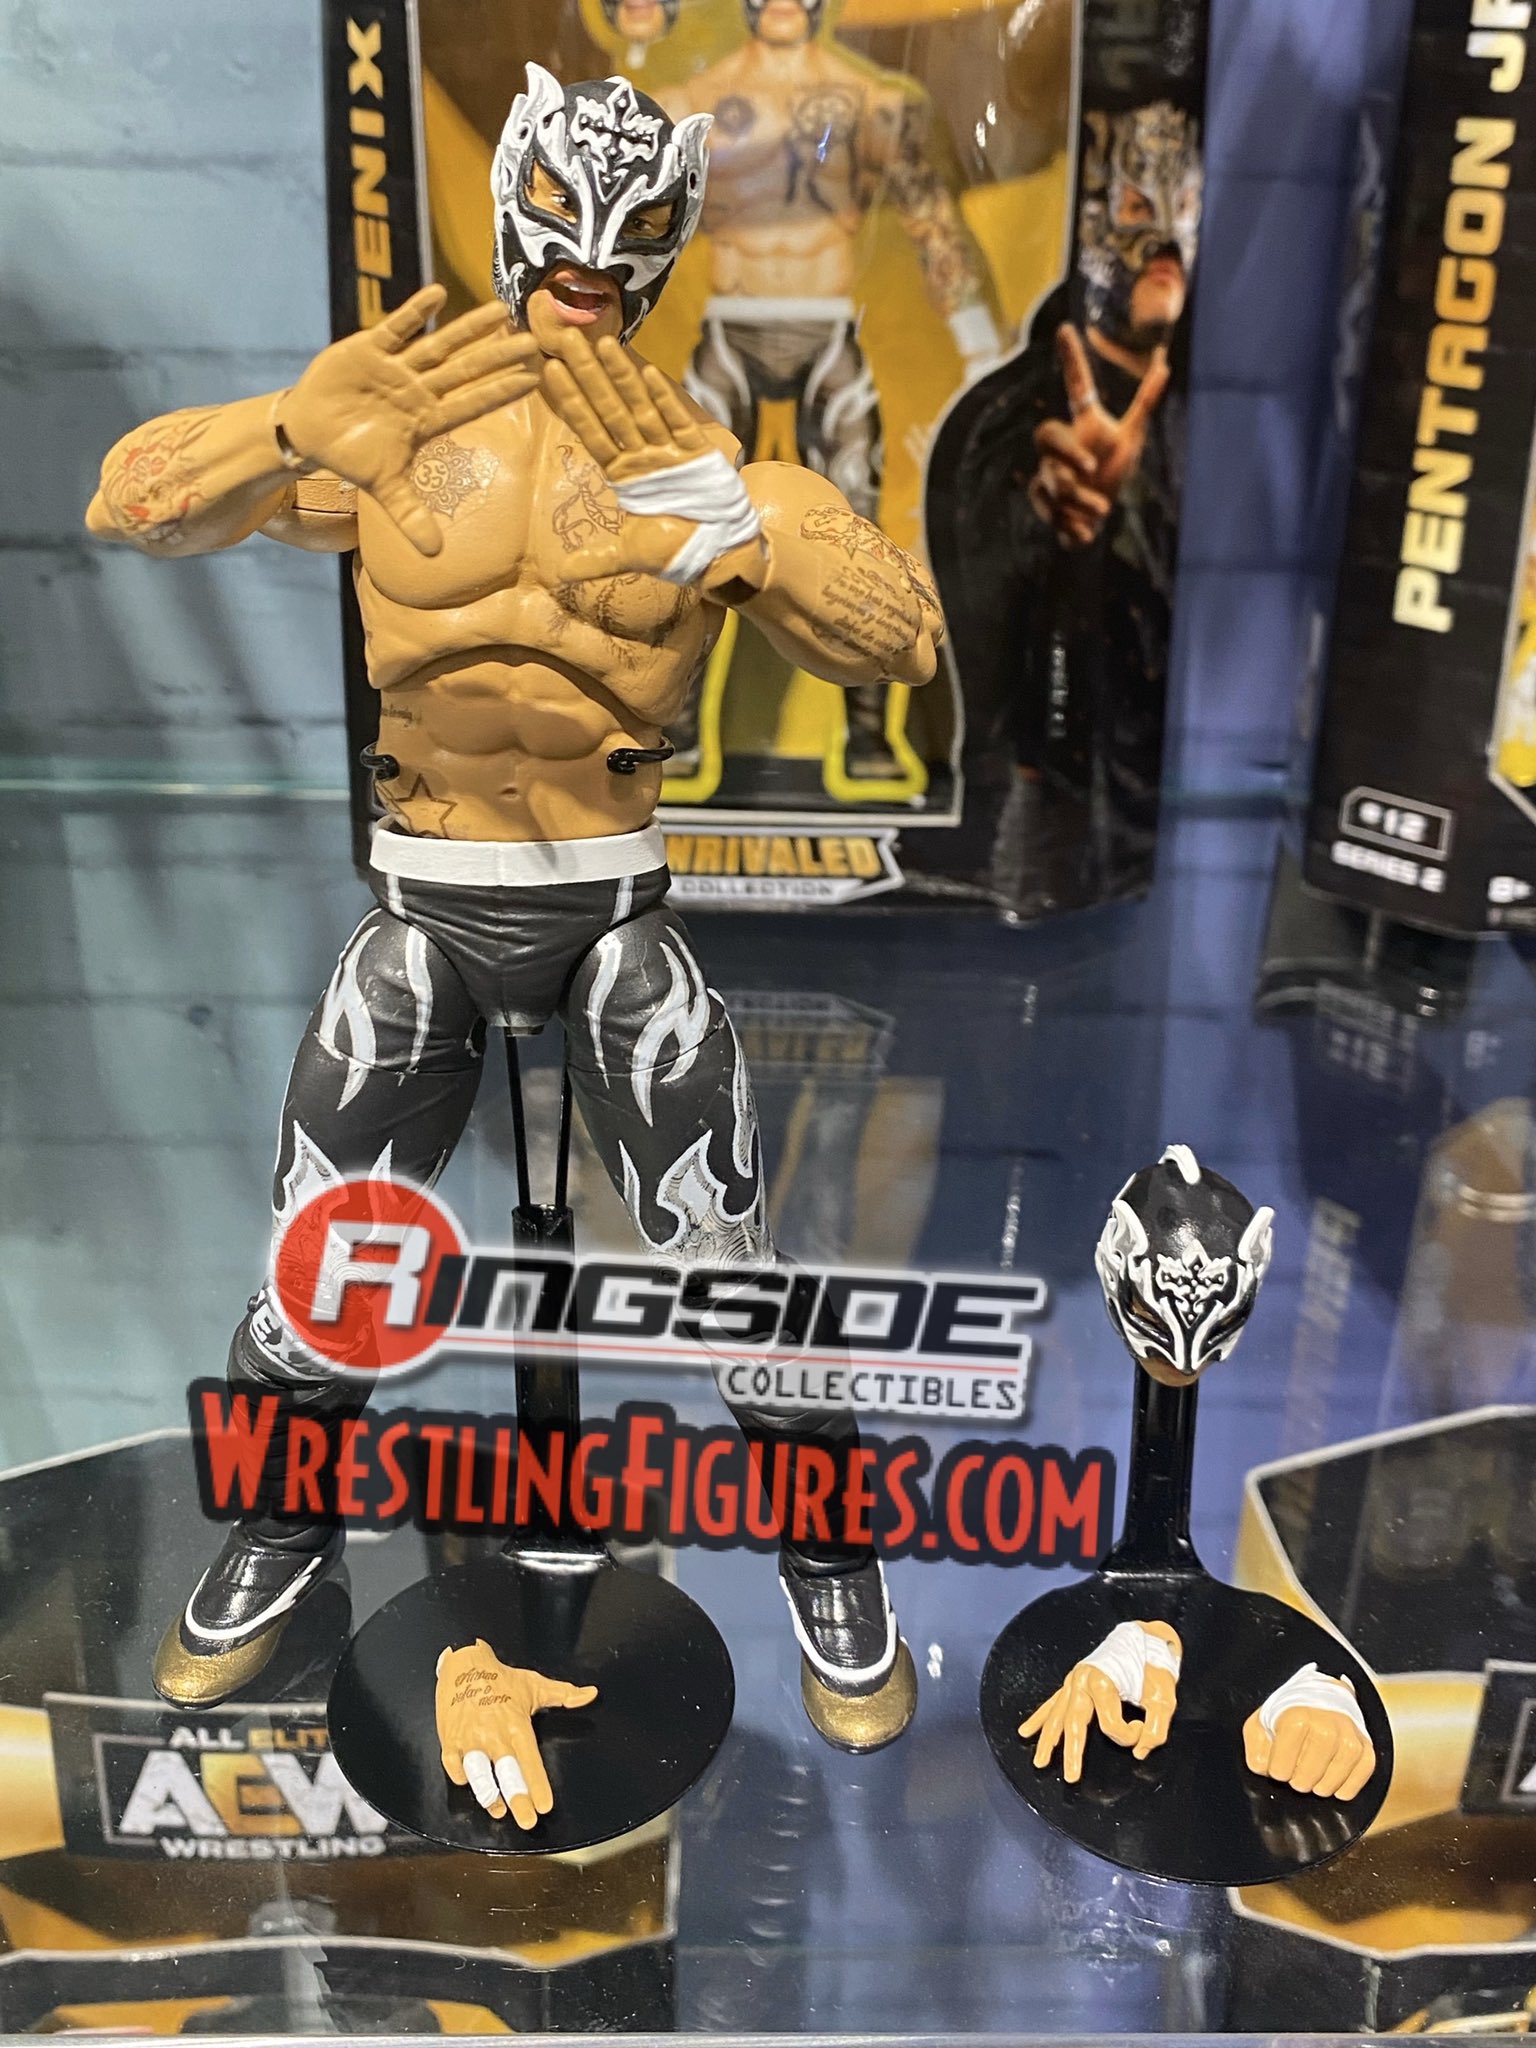 The AEW Action Figures debut.